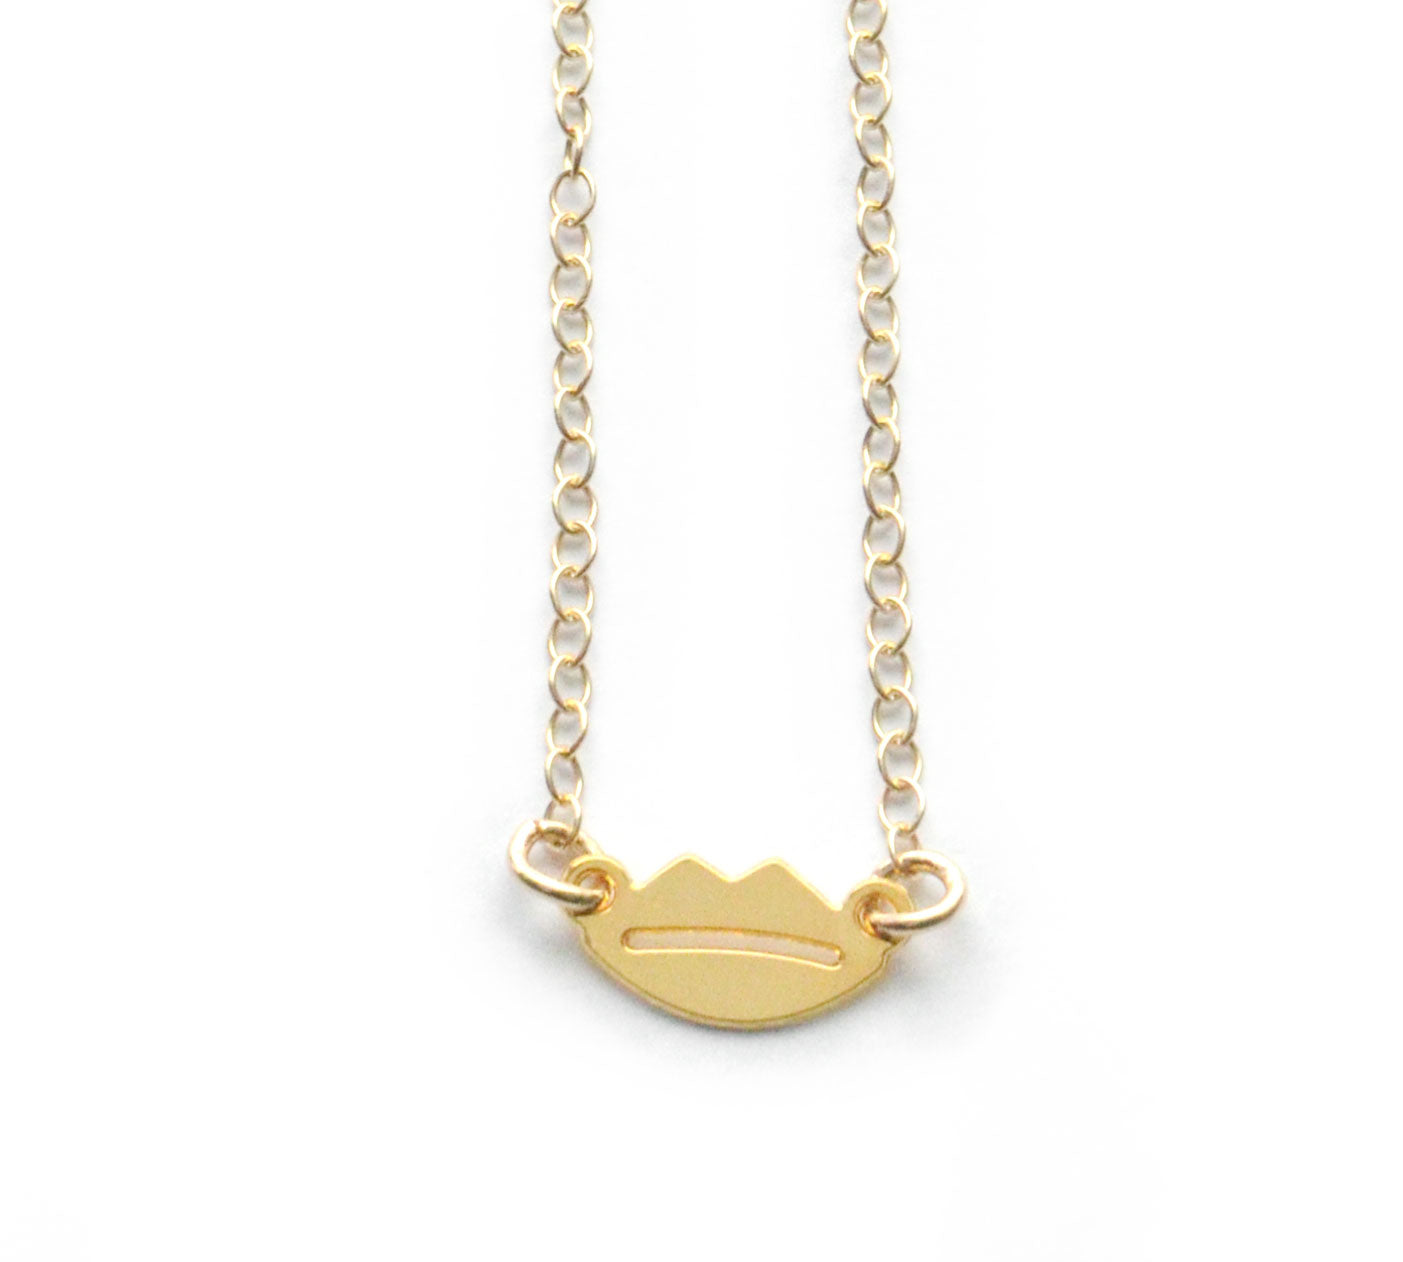 Mini Lips Necklace - High Quality, Affordable Necklace - Available in Gold and Silver - Made in USA - Brevity Jewelry